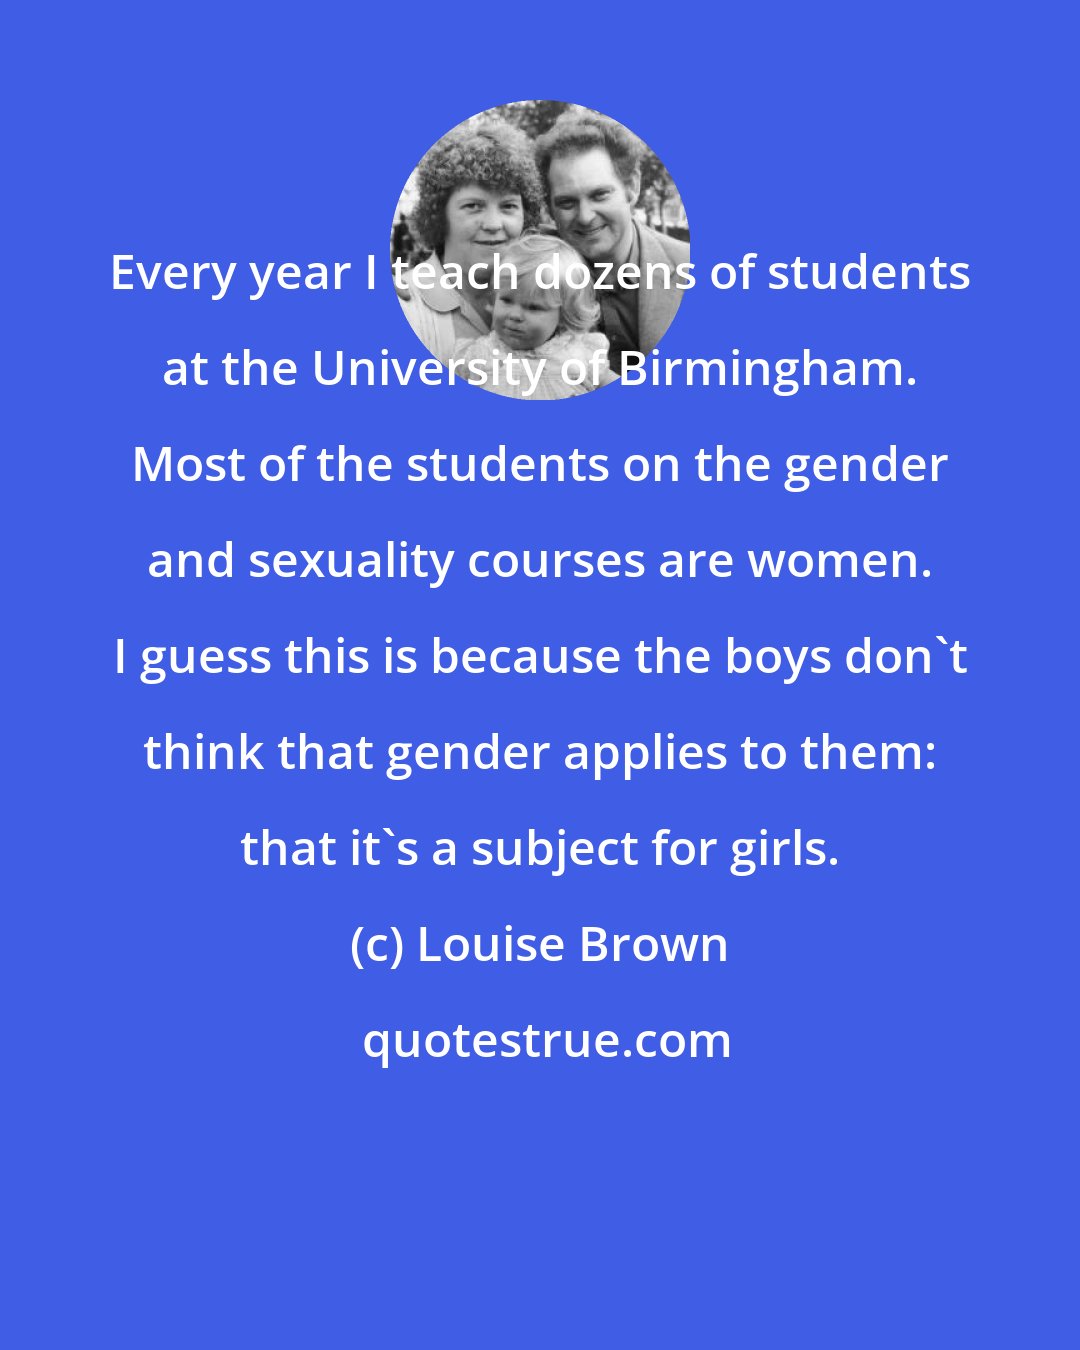 Louise Brown: Every year I teach dozens of students at the University of Birmingham. Most of the students on the gender and sexuality courses are women. I guess this is because the boys don't think that gender applies to them: that it's a subject for girls.